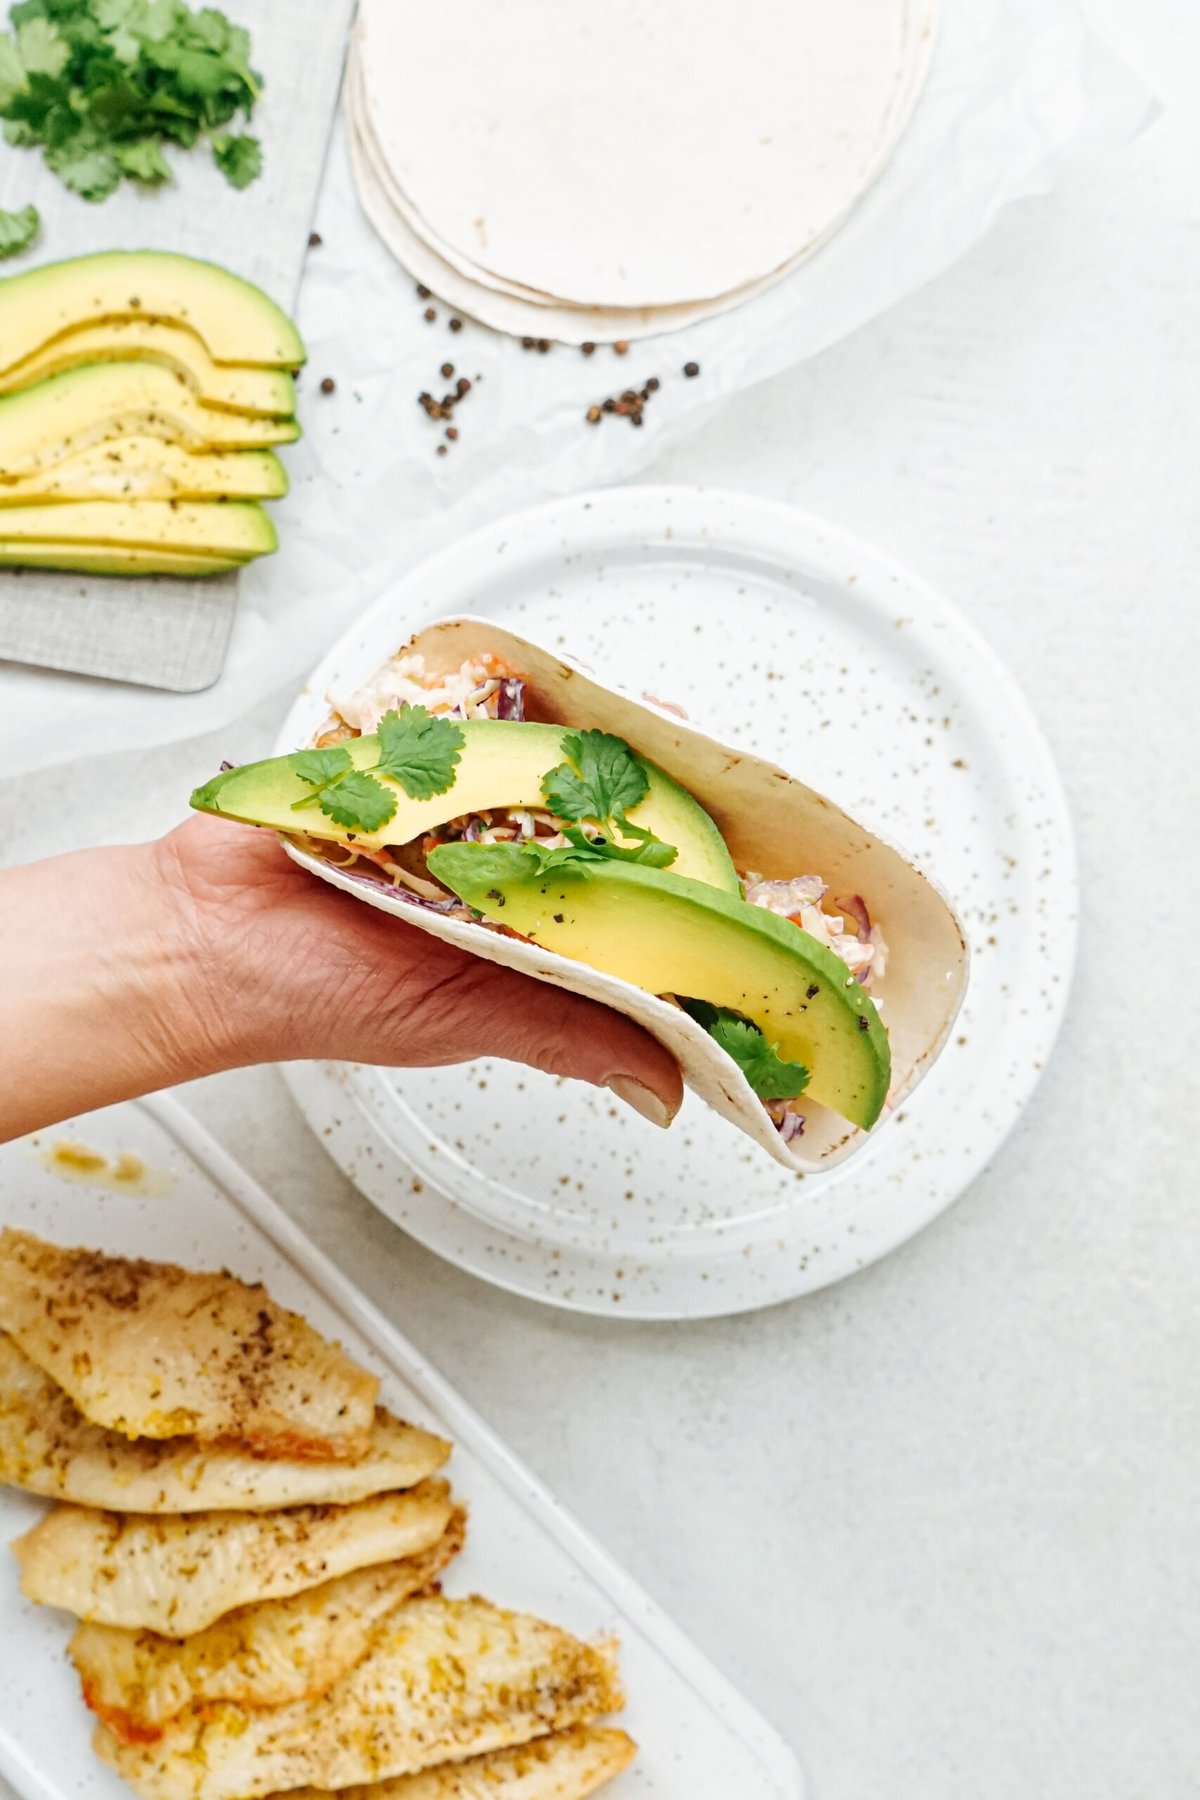 A hand holding a fish taco filled with avocado and topped with cilantro, served on a speckled plate alongside grilled chicken strips.